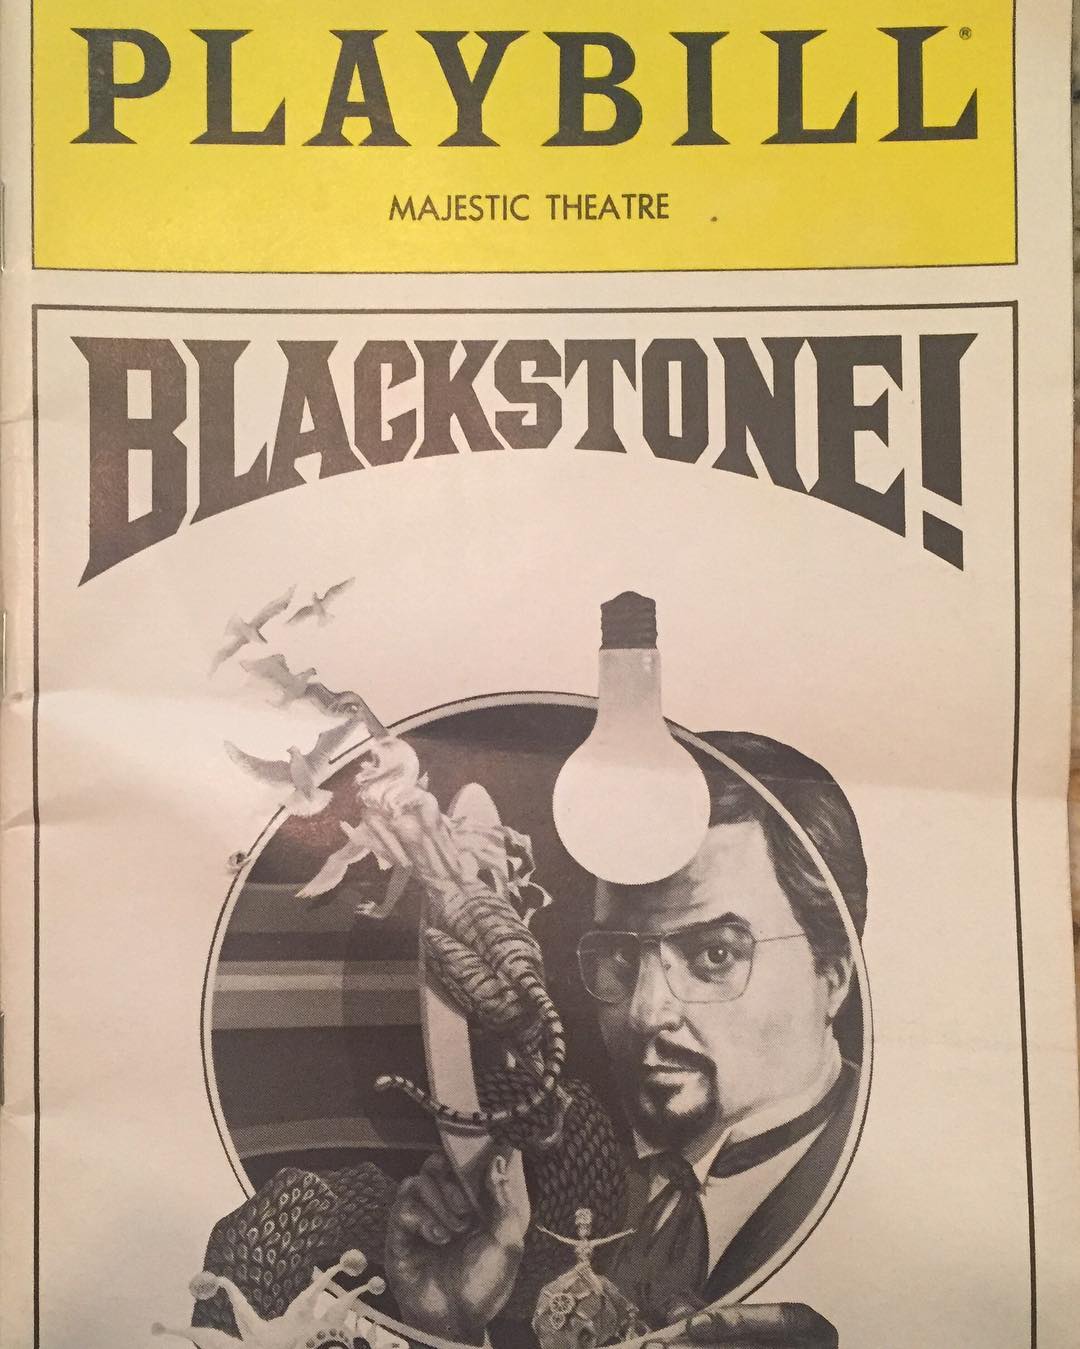 This is a playbill I came across for Harry Blackstone Jr. Performing at the Majestic Theater on Broadway in the summer of 1980. #magic